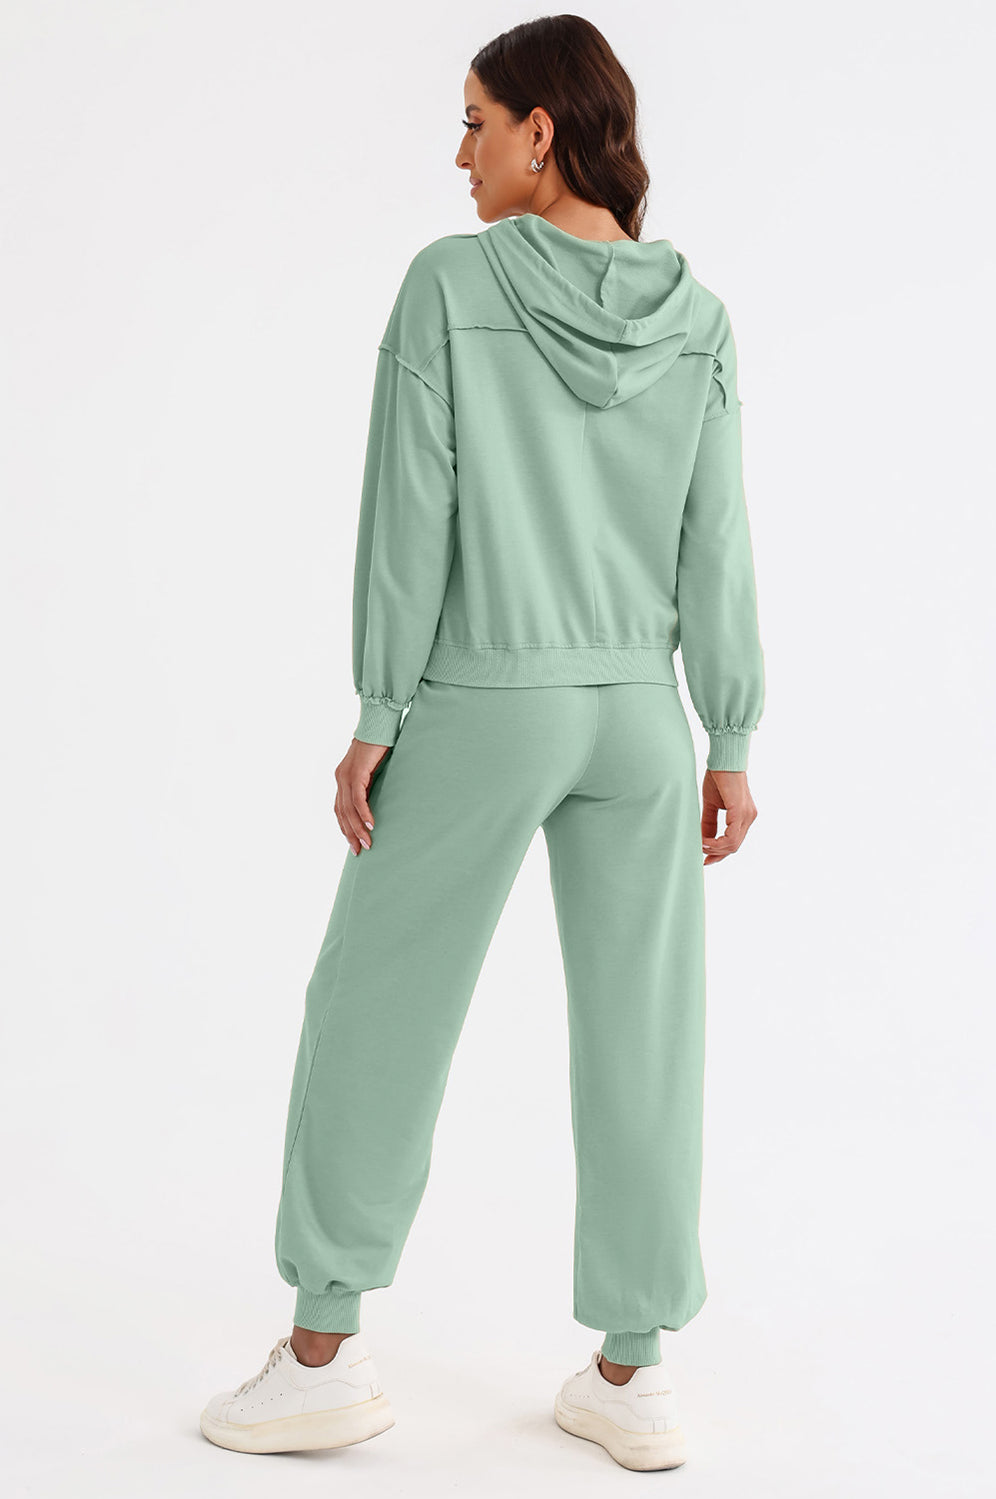 Cutout Drawstring Hoodie and Joggers Active Set Trendsi